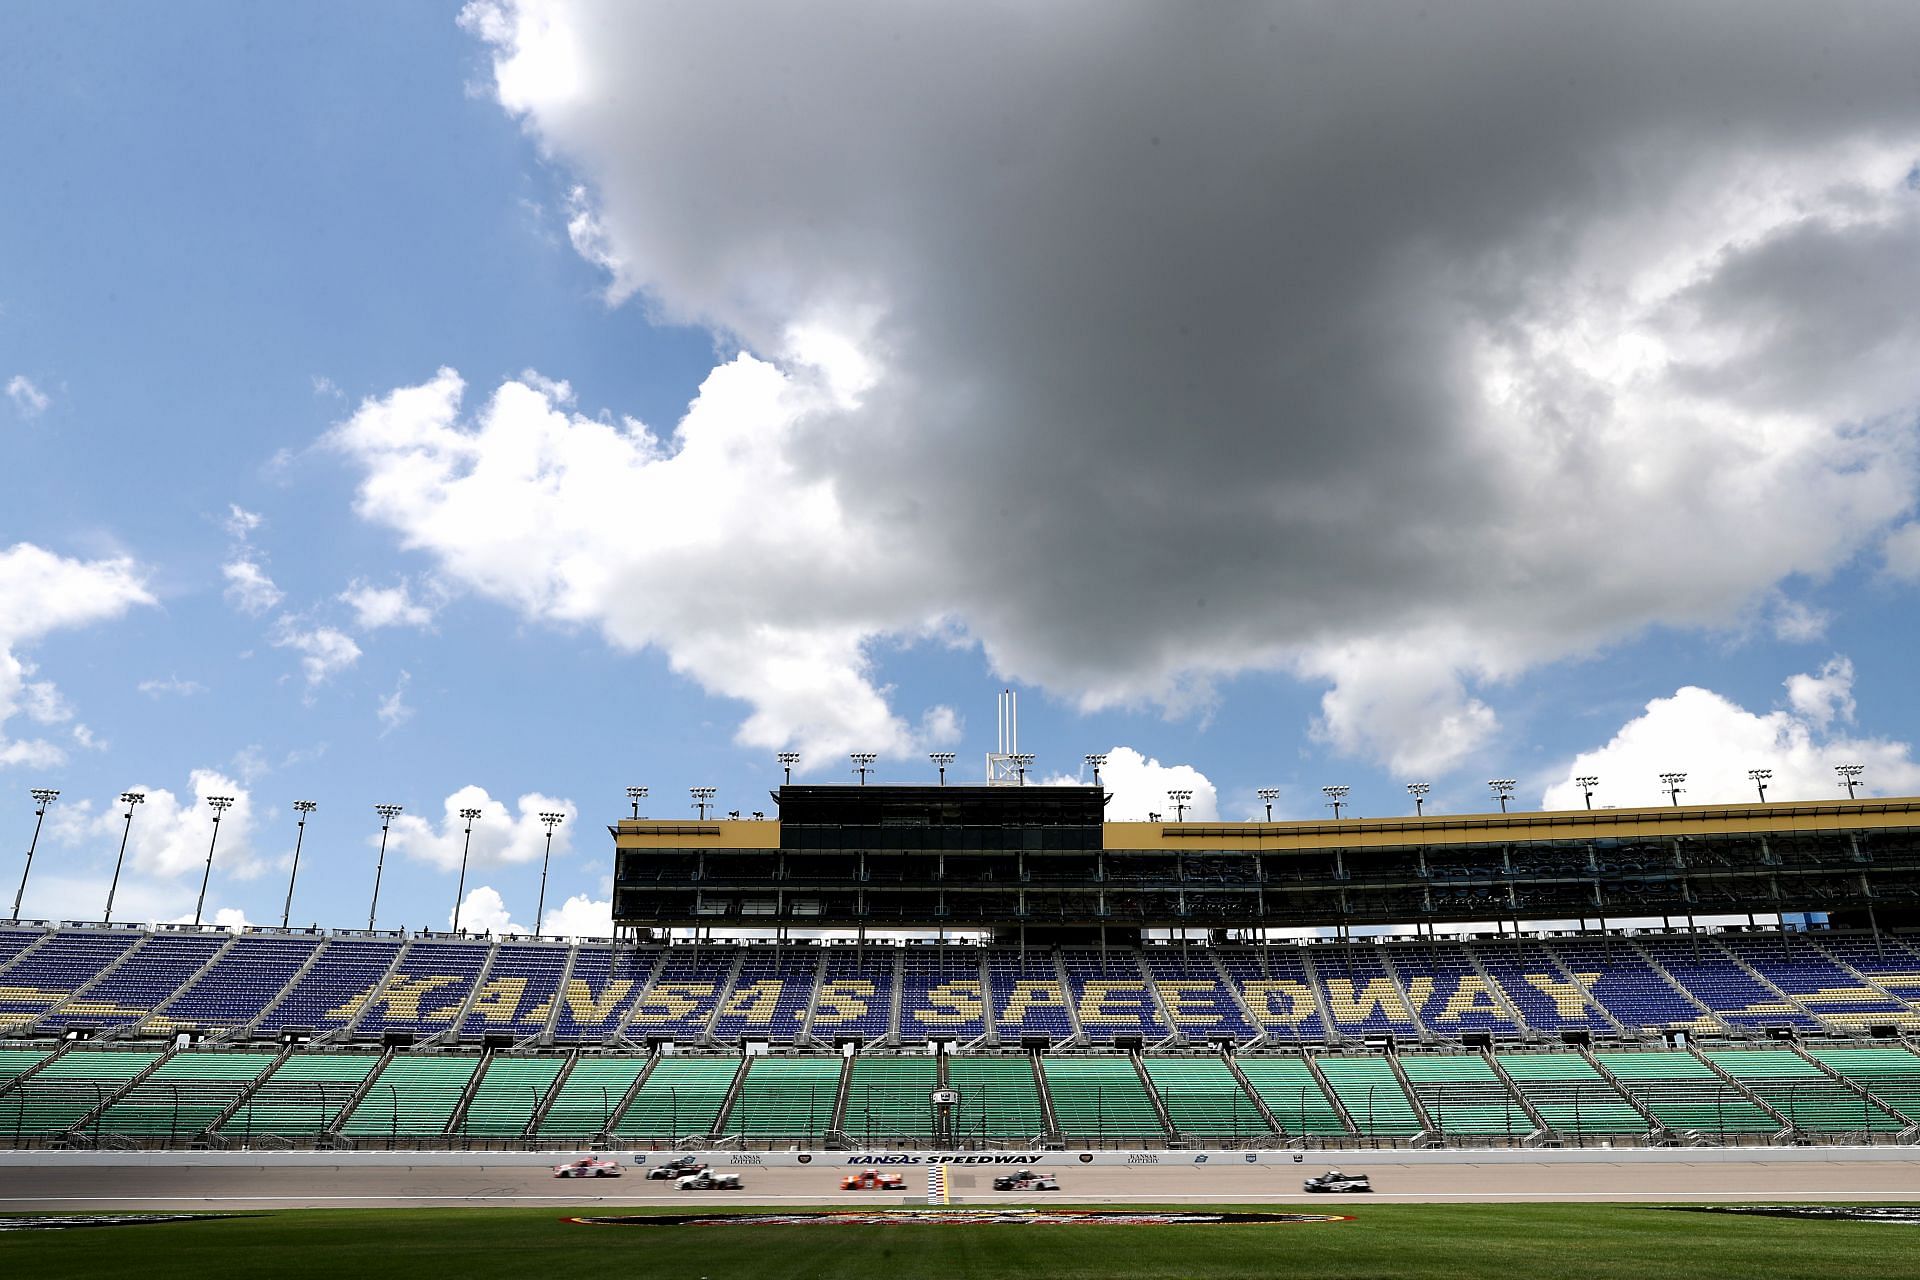 A general view of NASCAR Cup Series at Kansas Speedway (Photo by Jamie Squire/Getty Images)